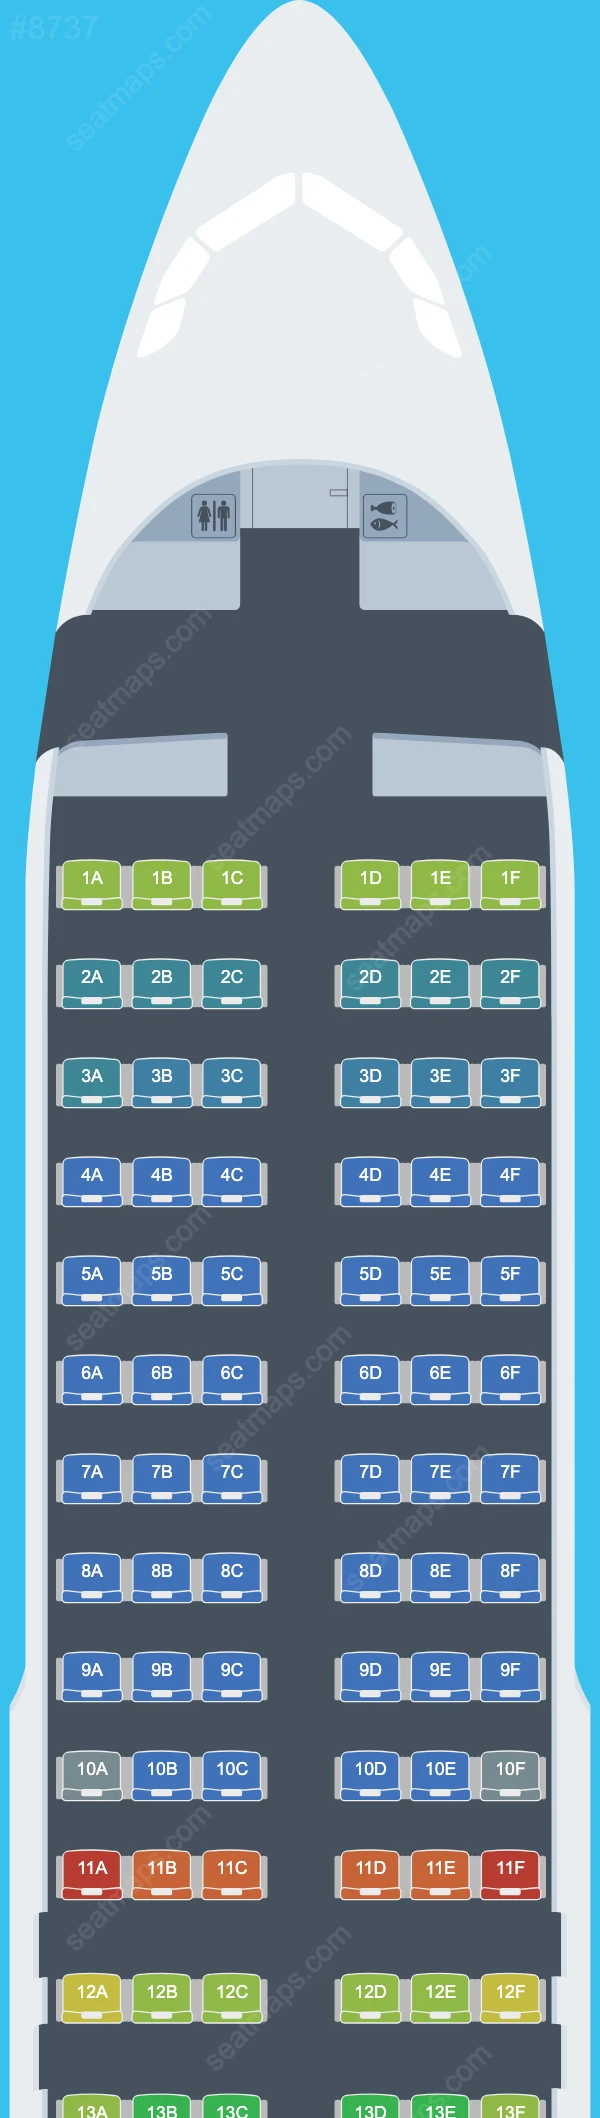 Sky Airline Airbus A320 Seat Maps A320-200neo